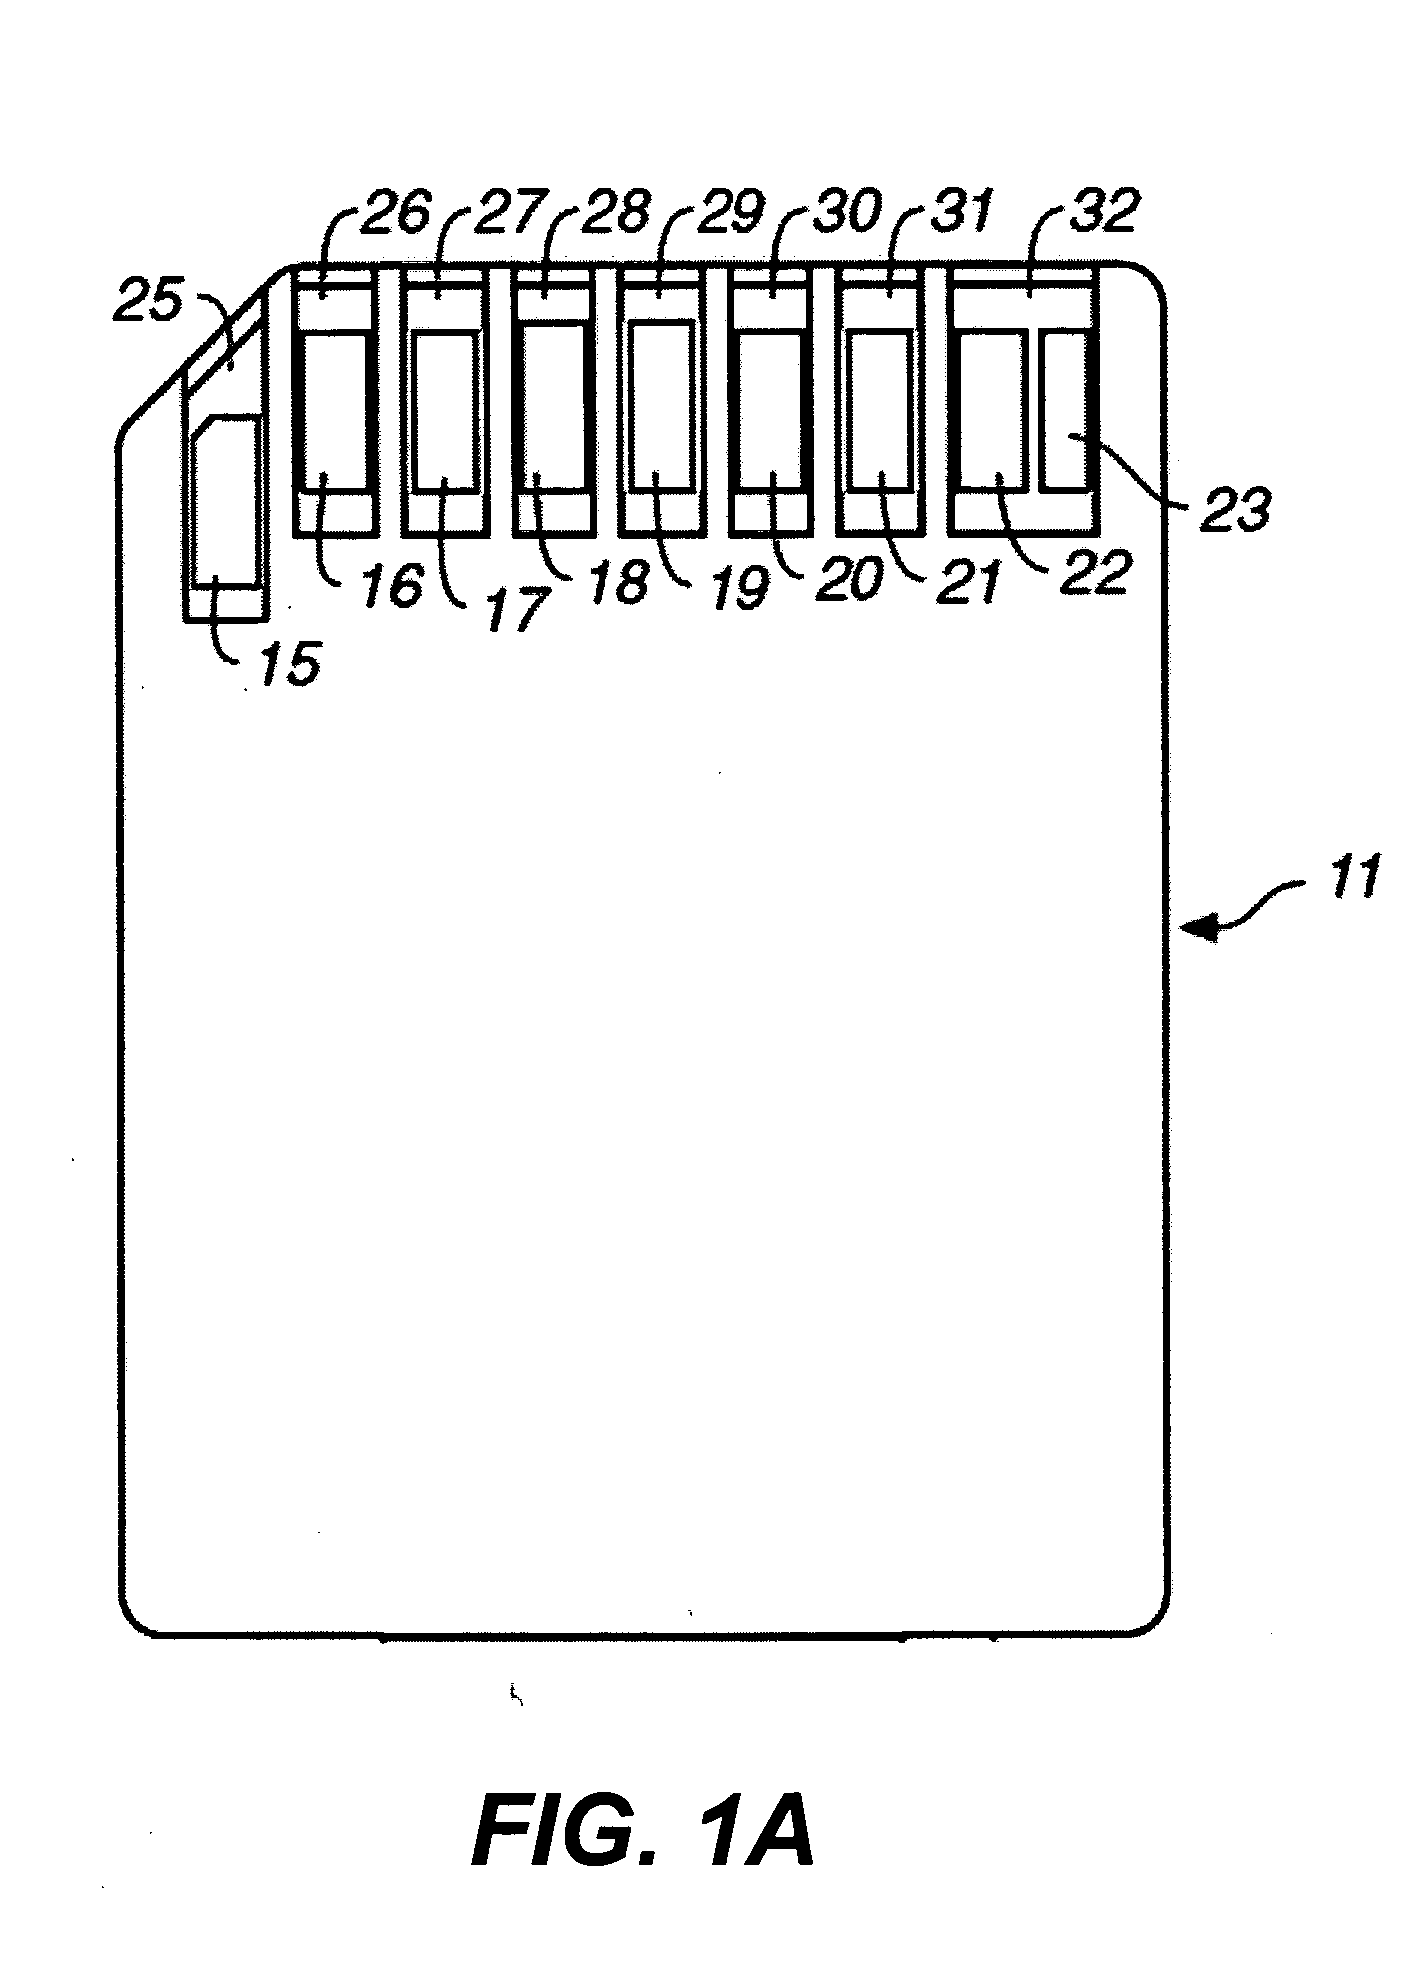 Nested memory system with near field communications capability